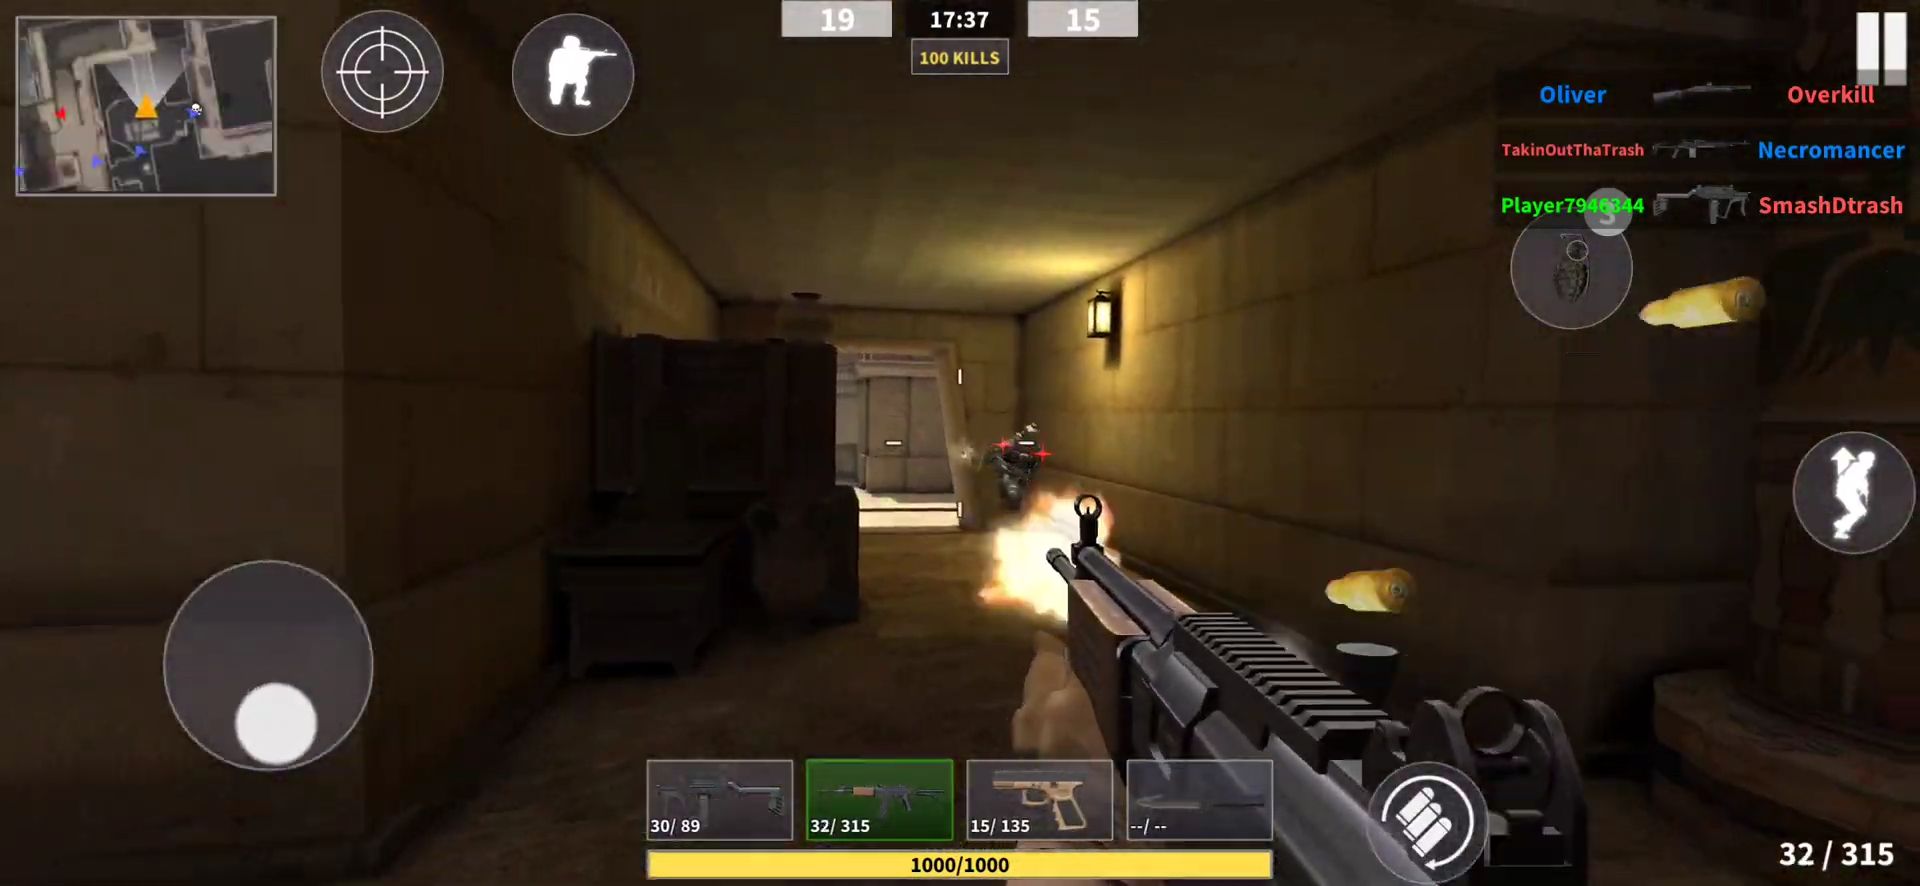 Hazmob FPS Online multiplayer fps shooting game Download APK for Android ( Free) mob